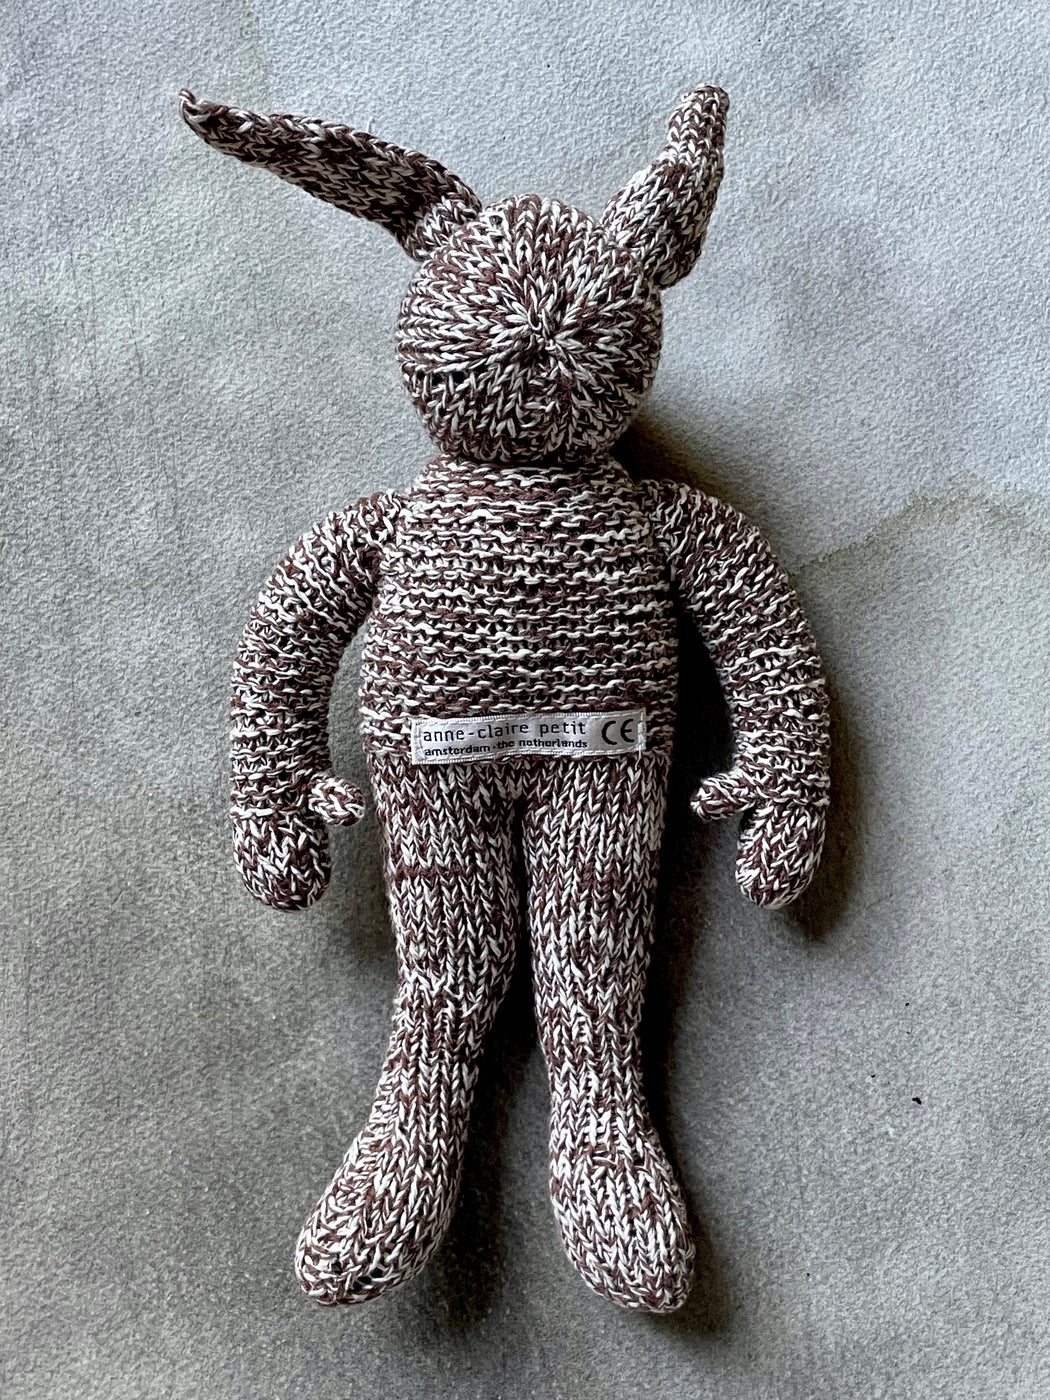 Brown "Maria the Rabbit" by Anne-Claire Petit